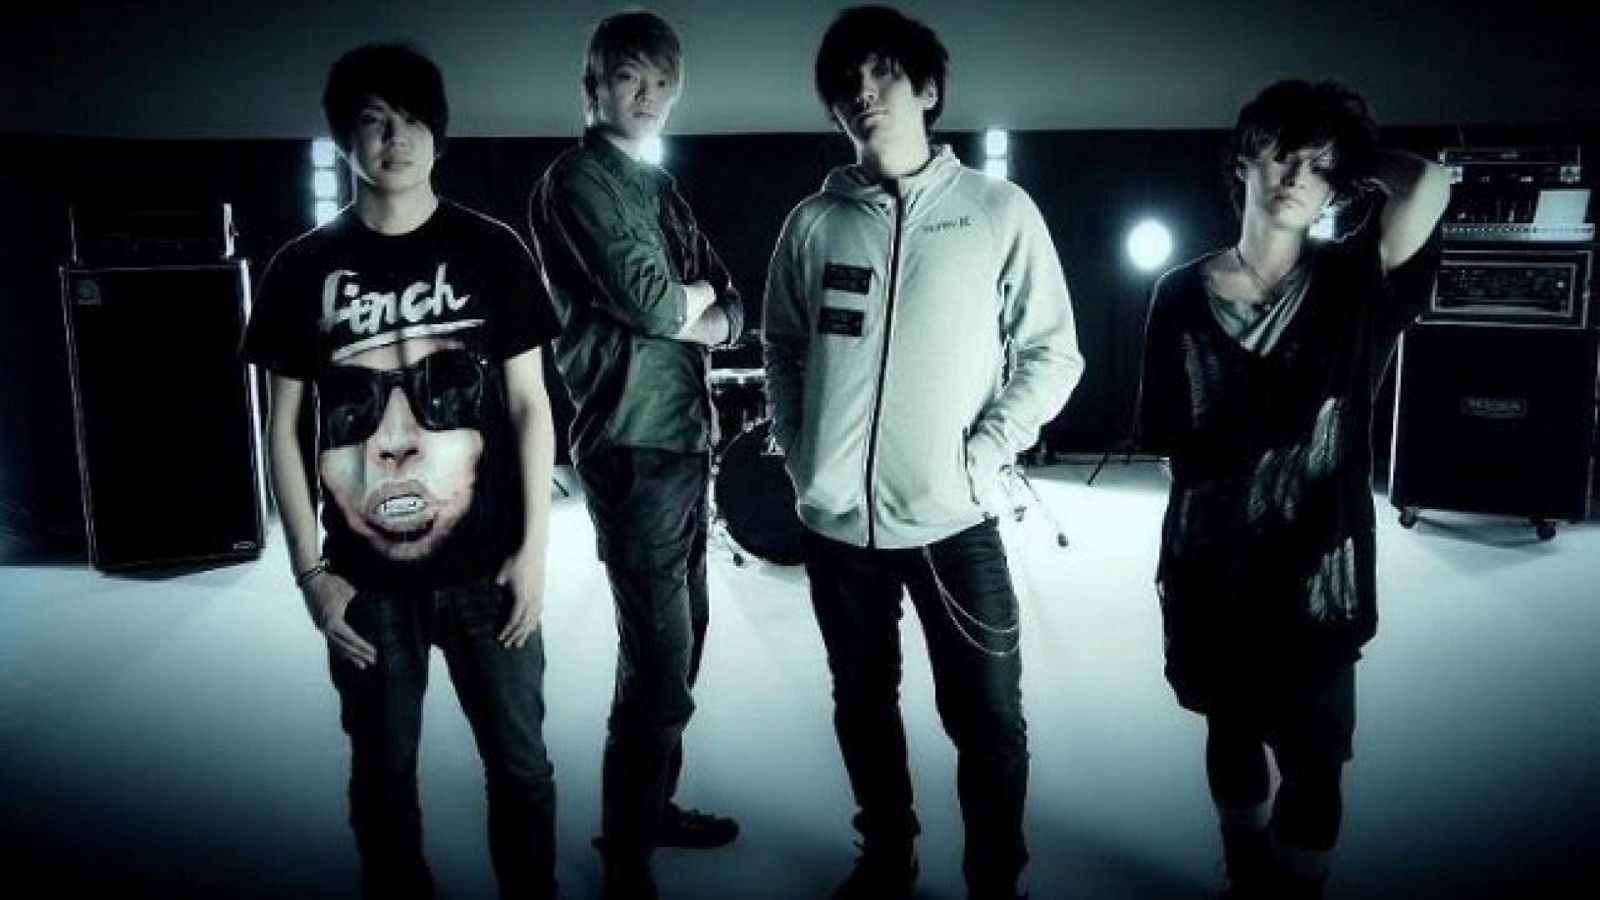 Silhouette from the Skylit © Silhouette from the Skylit